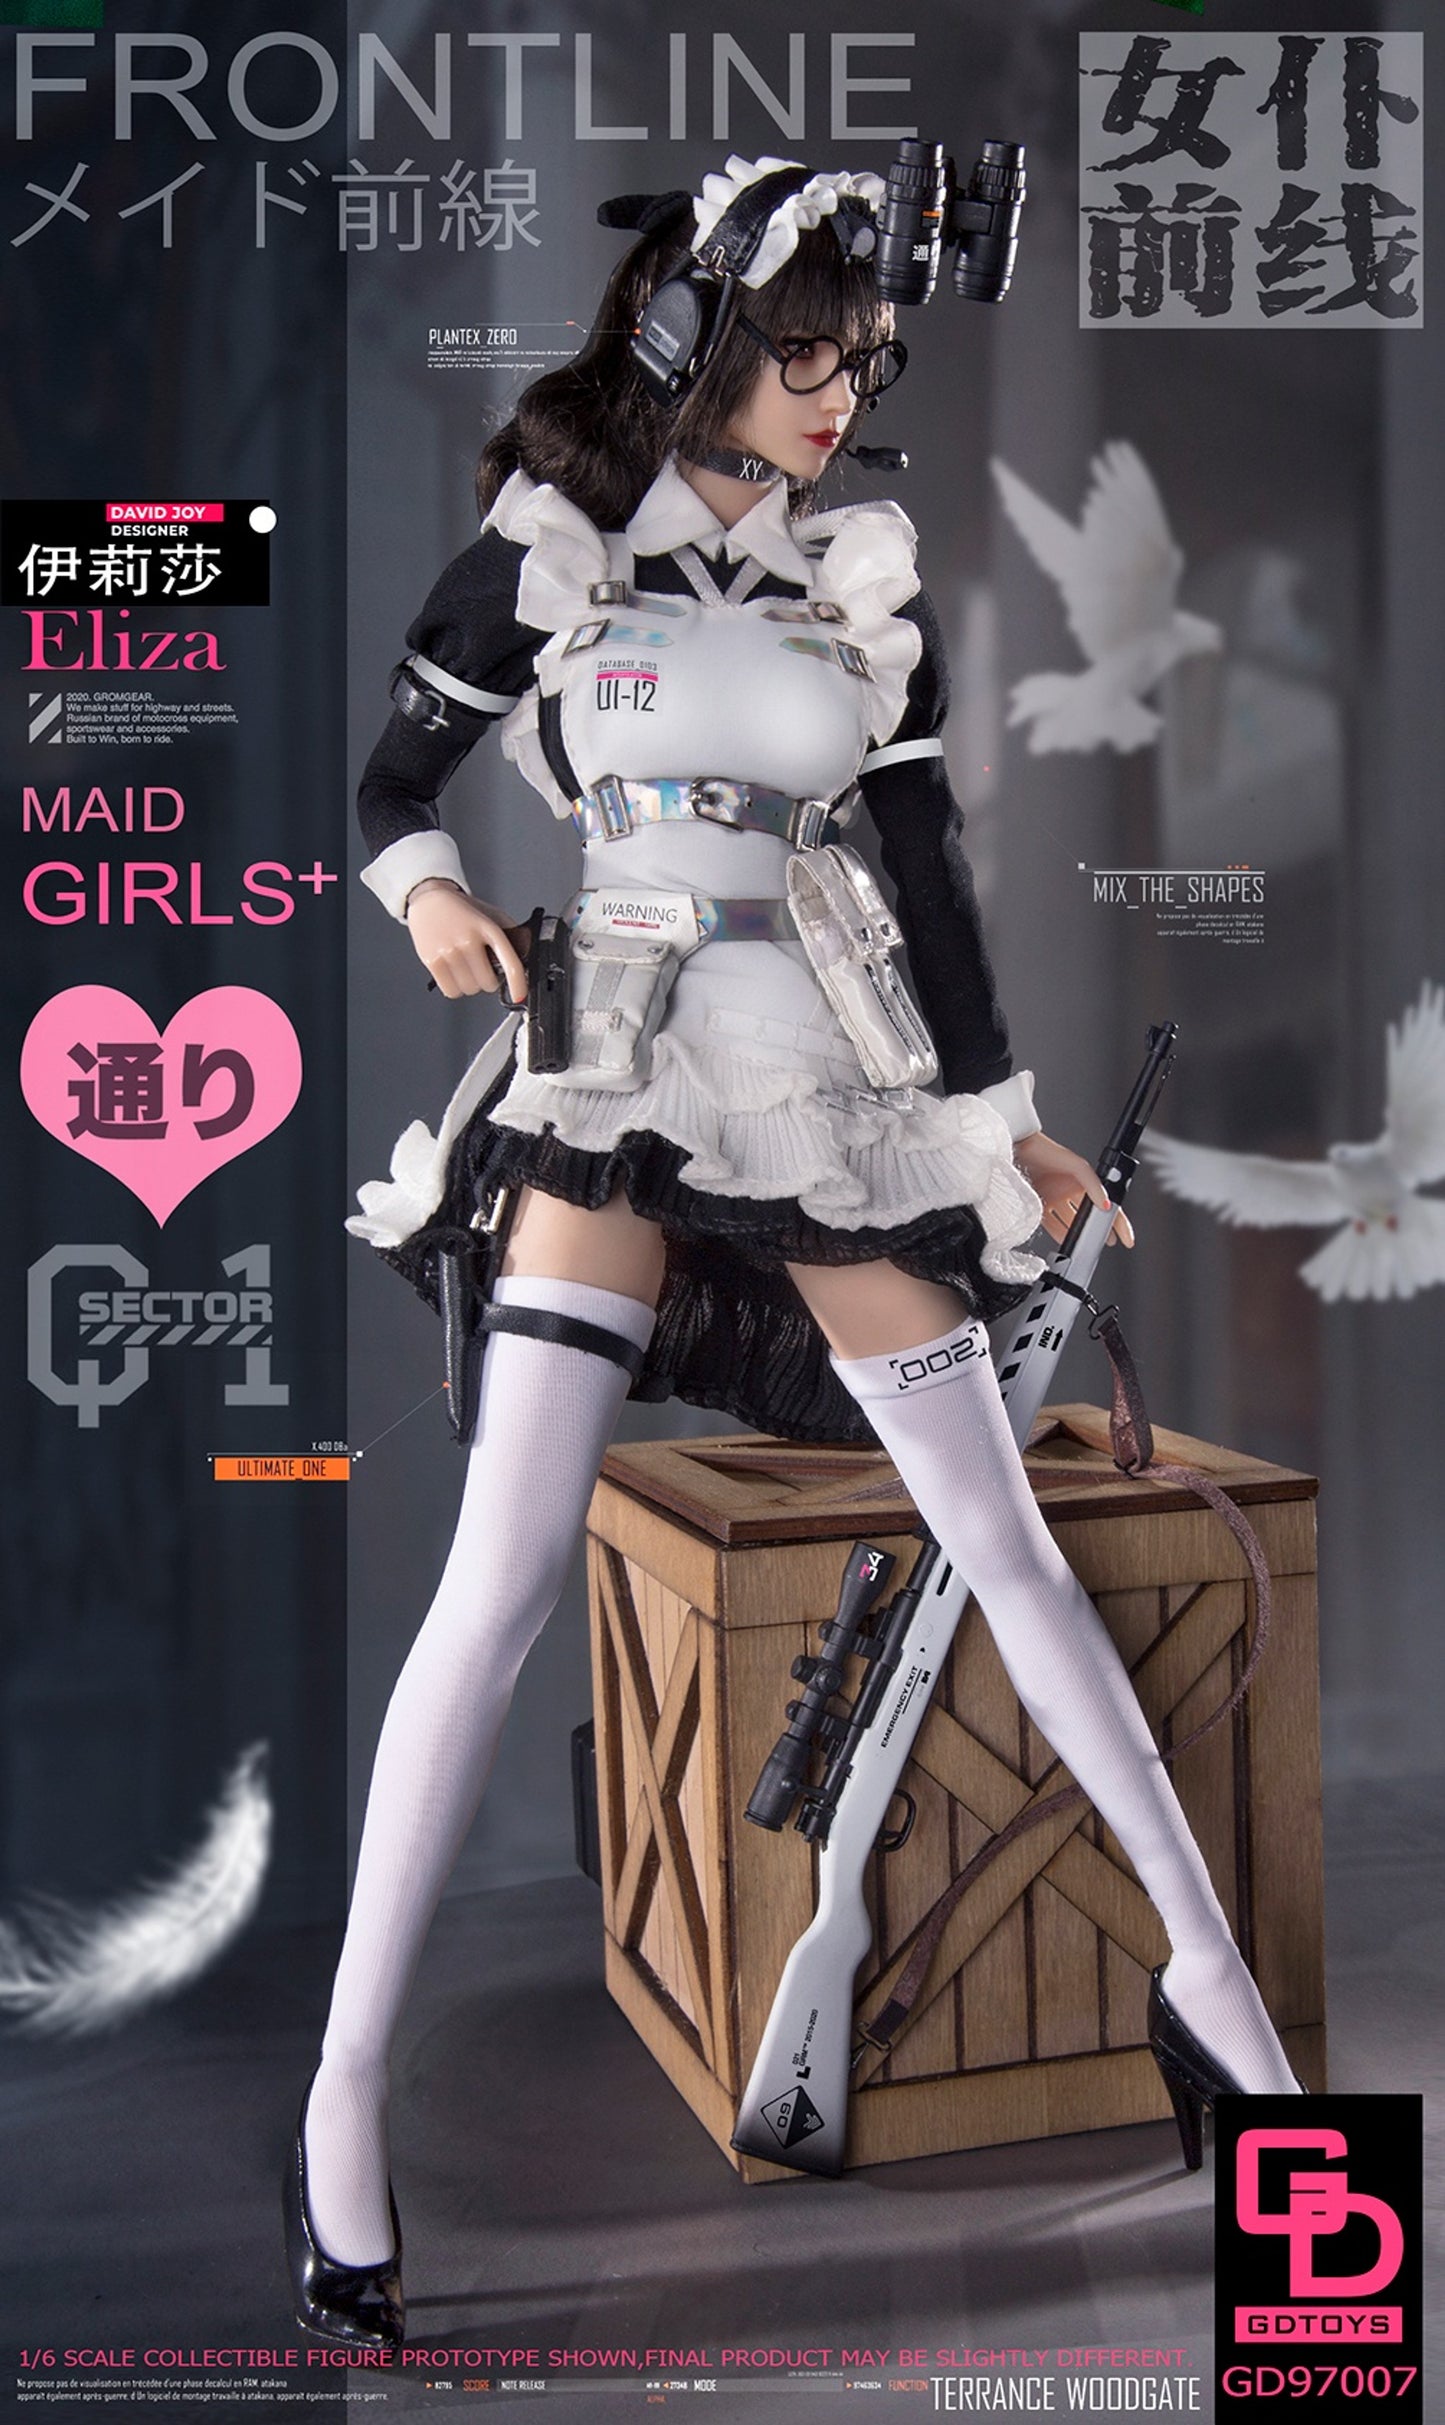 GD Toys Maid Girls Frontline Eliza 1/6 Scale Figure